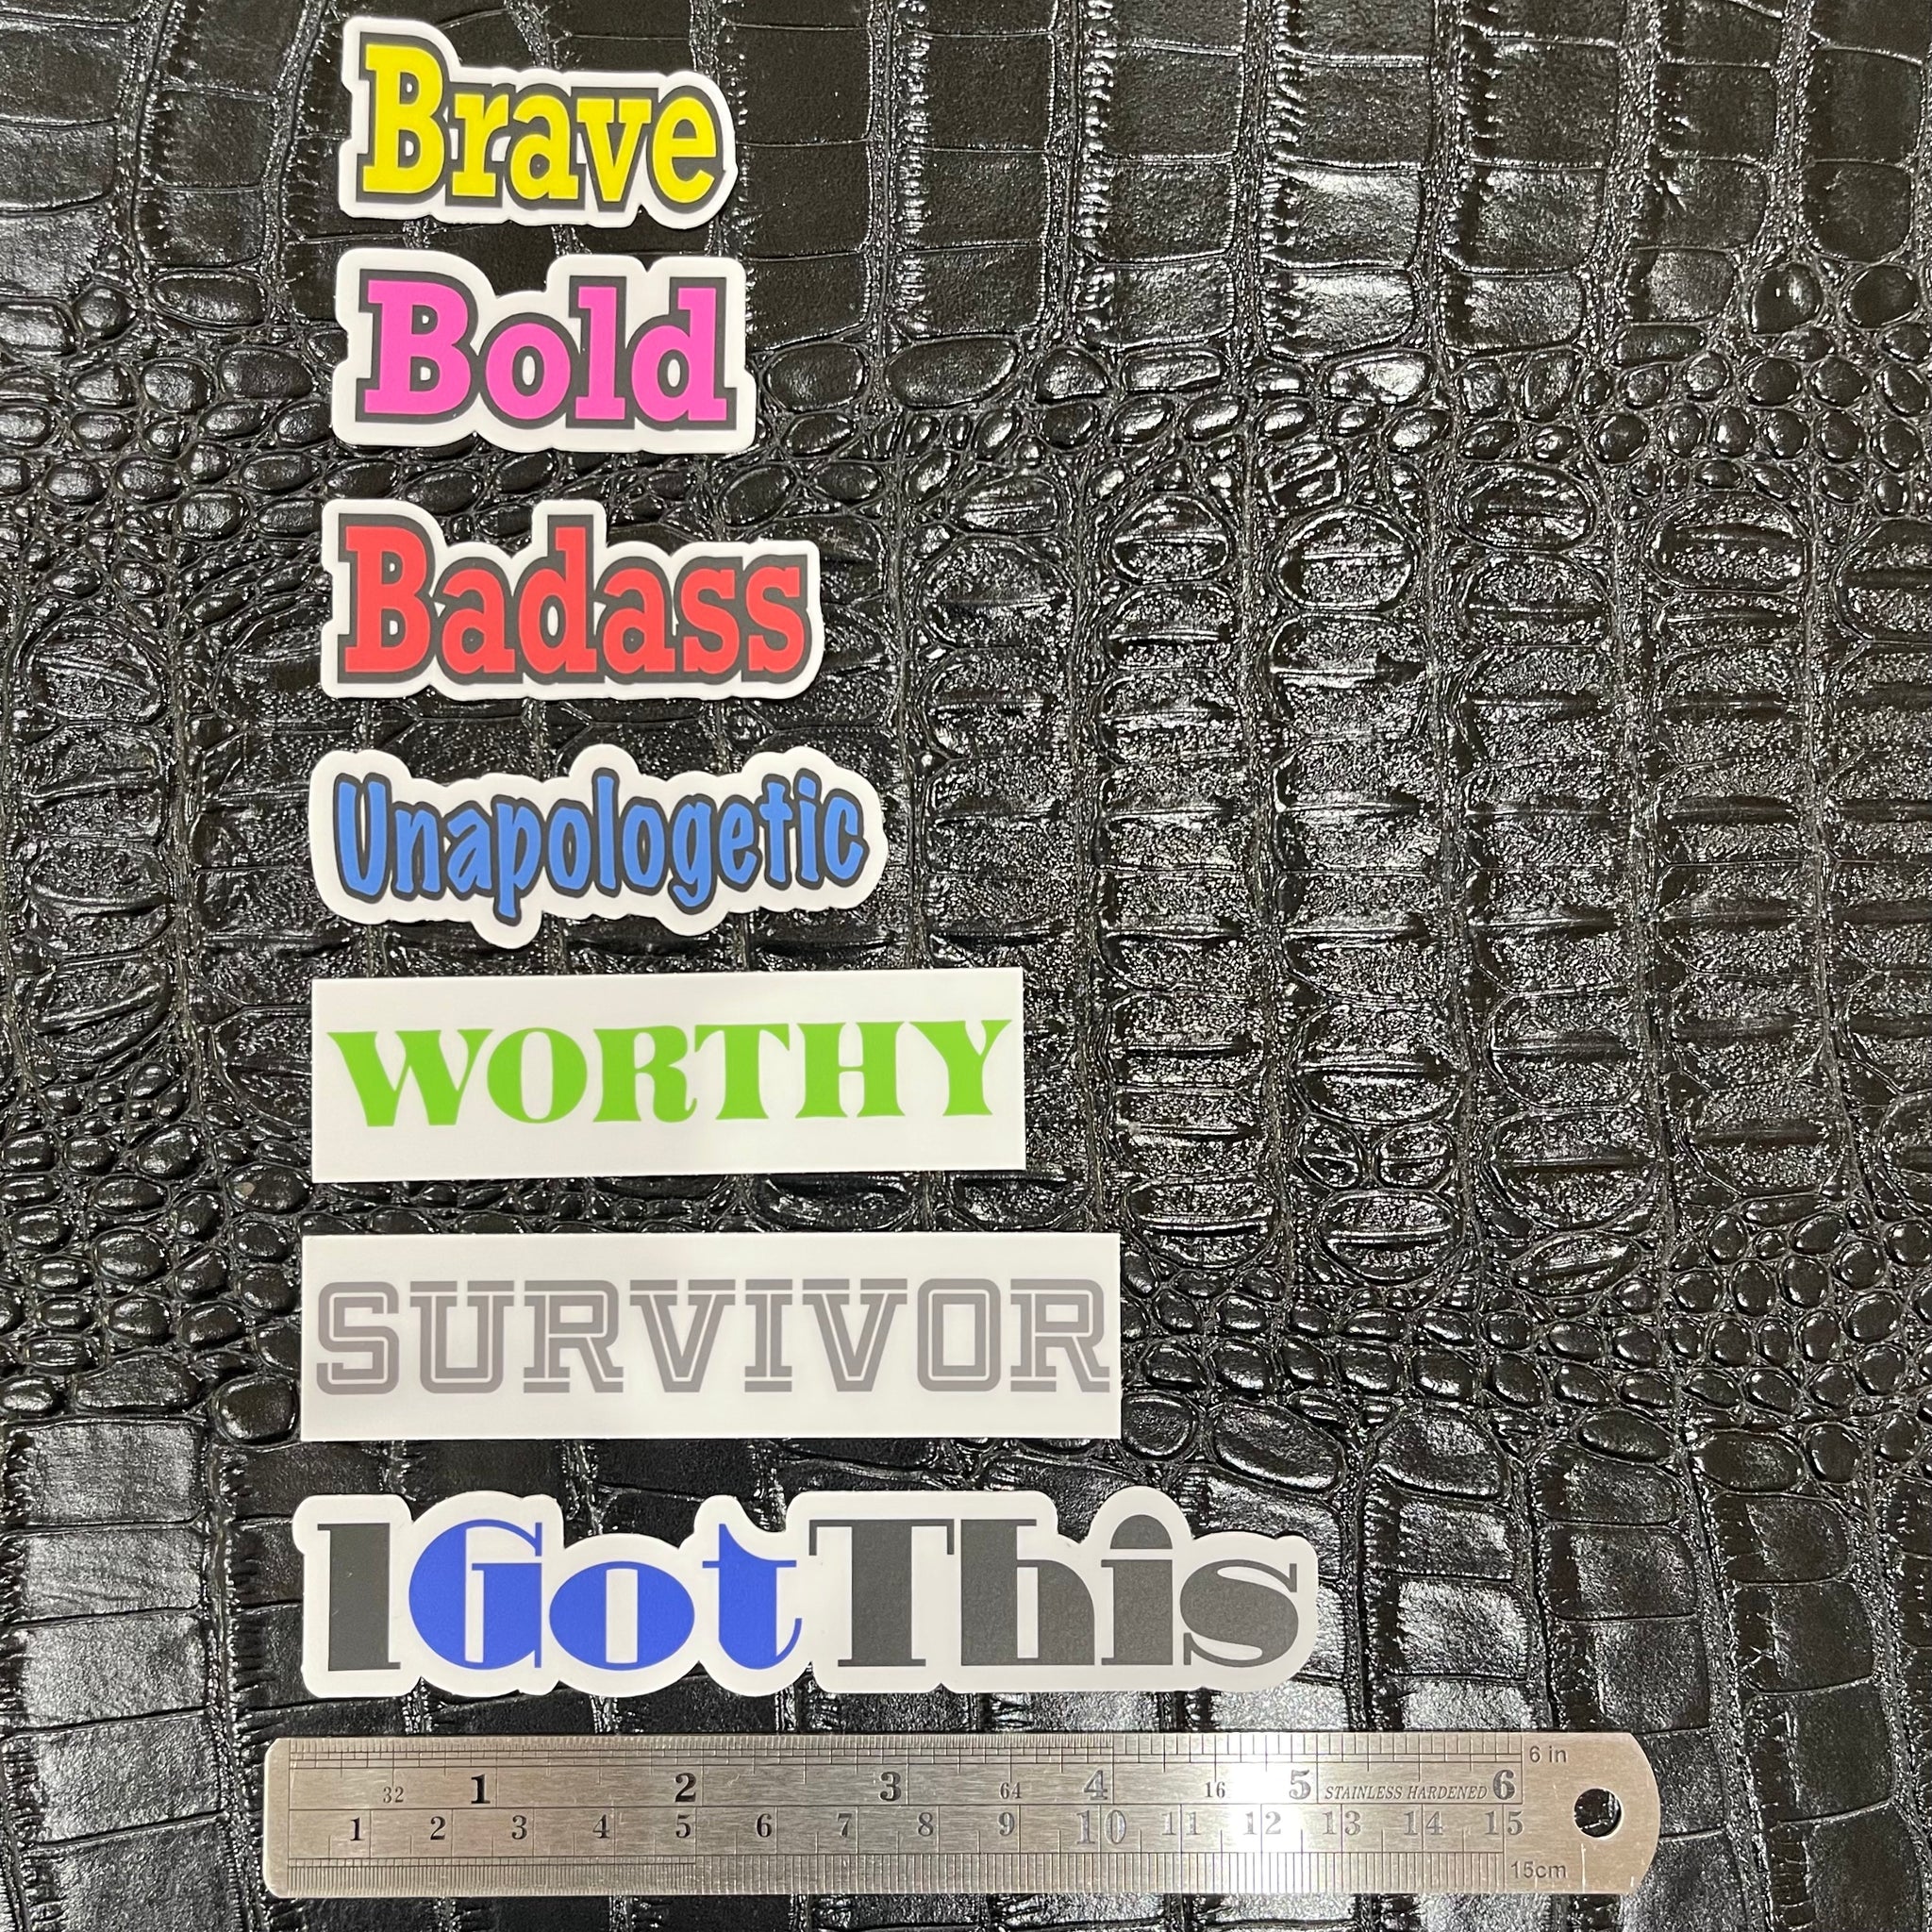 Seven vinyl word stickers. Brave is yellow, Bold is hot pink, Badass is red, Unapologetic is blue, Worthy is neon green, Survivor is gray, I Got This is blue and black.